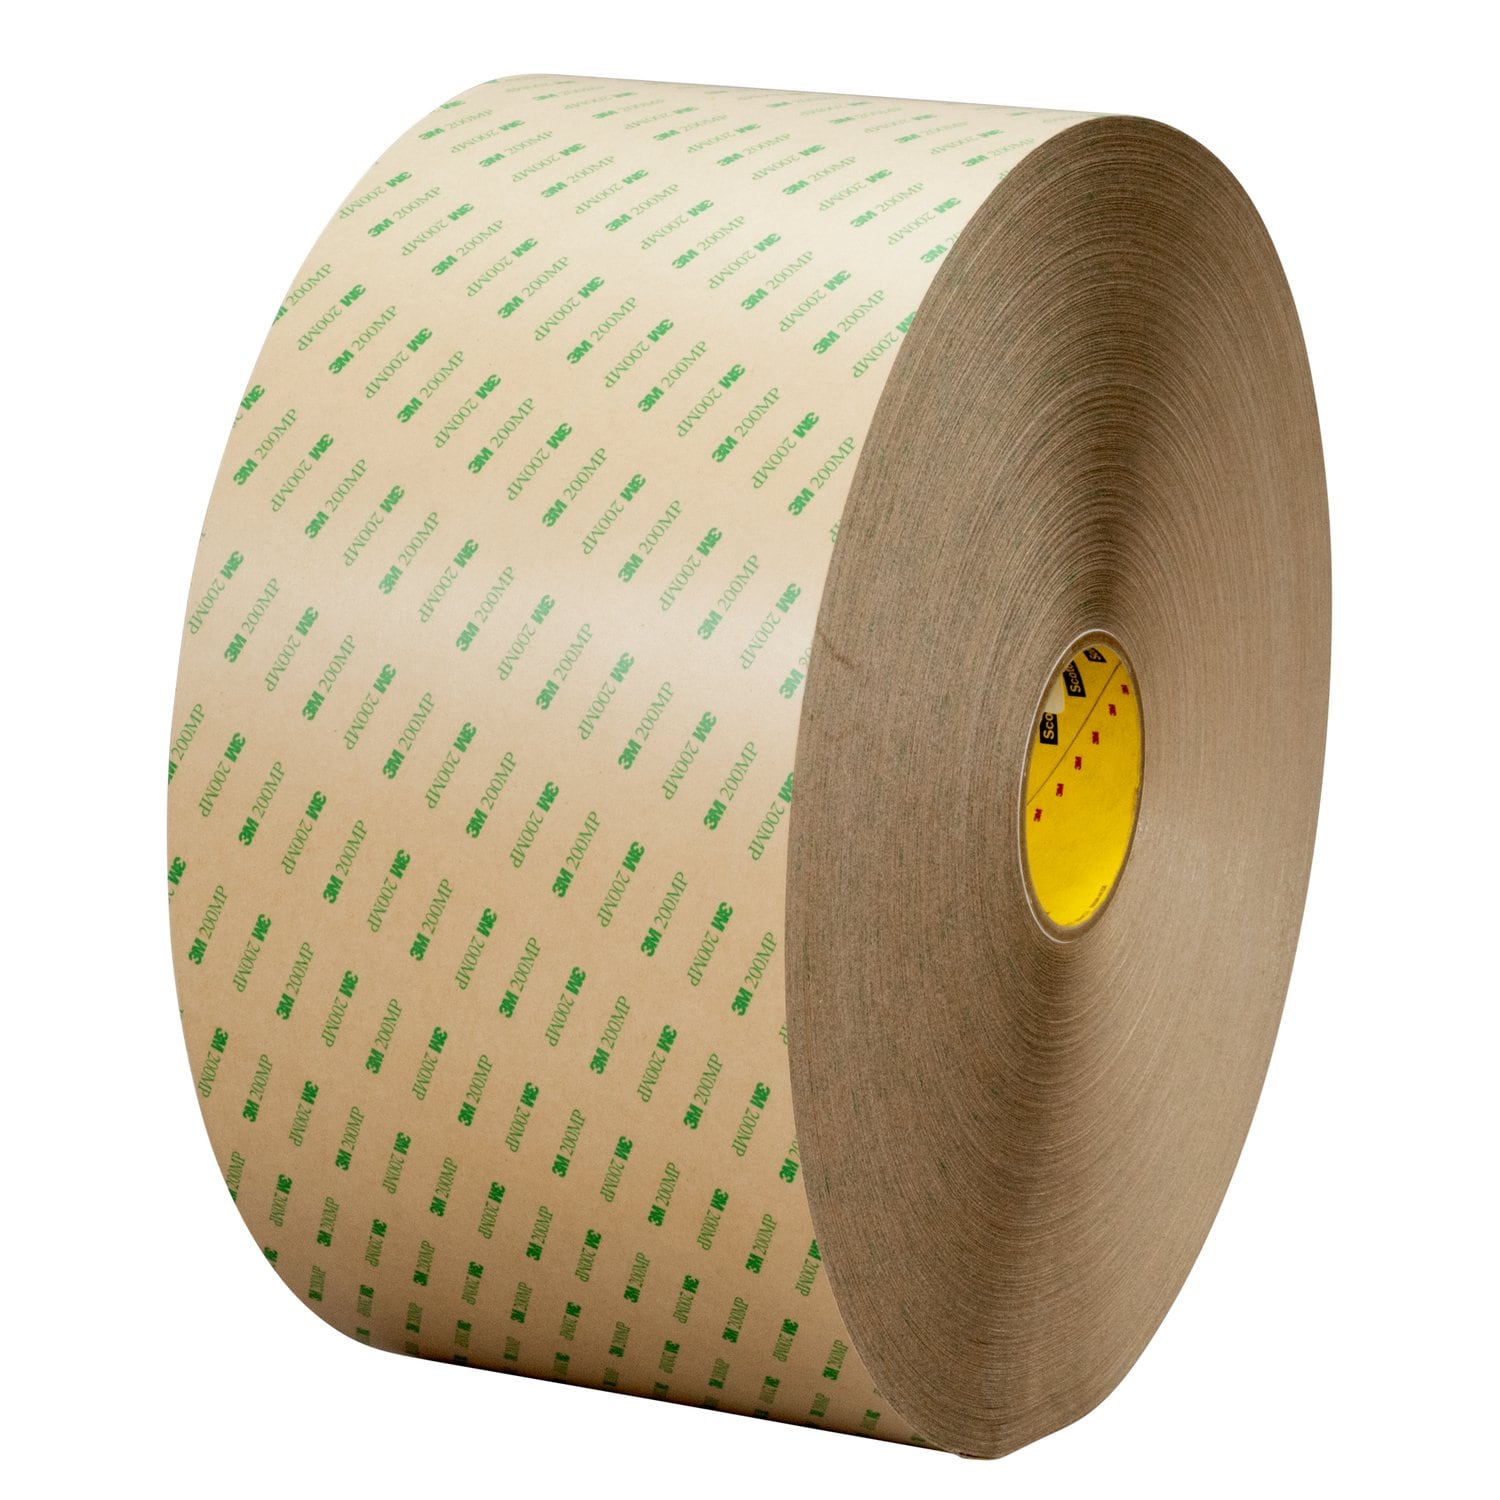 7000123418 - 3M Adhesive Transfer Tape 9668MP, Clear, 24 in x 180 yd, 5 mil, 1 roll
per case